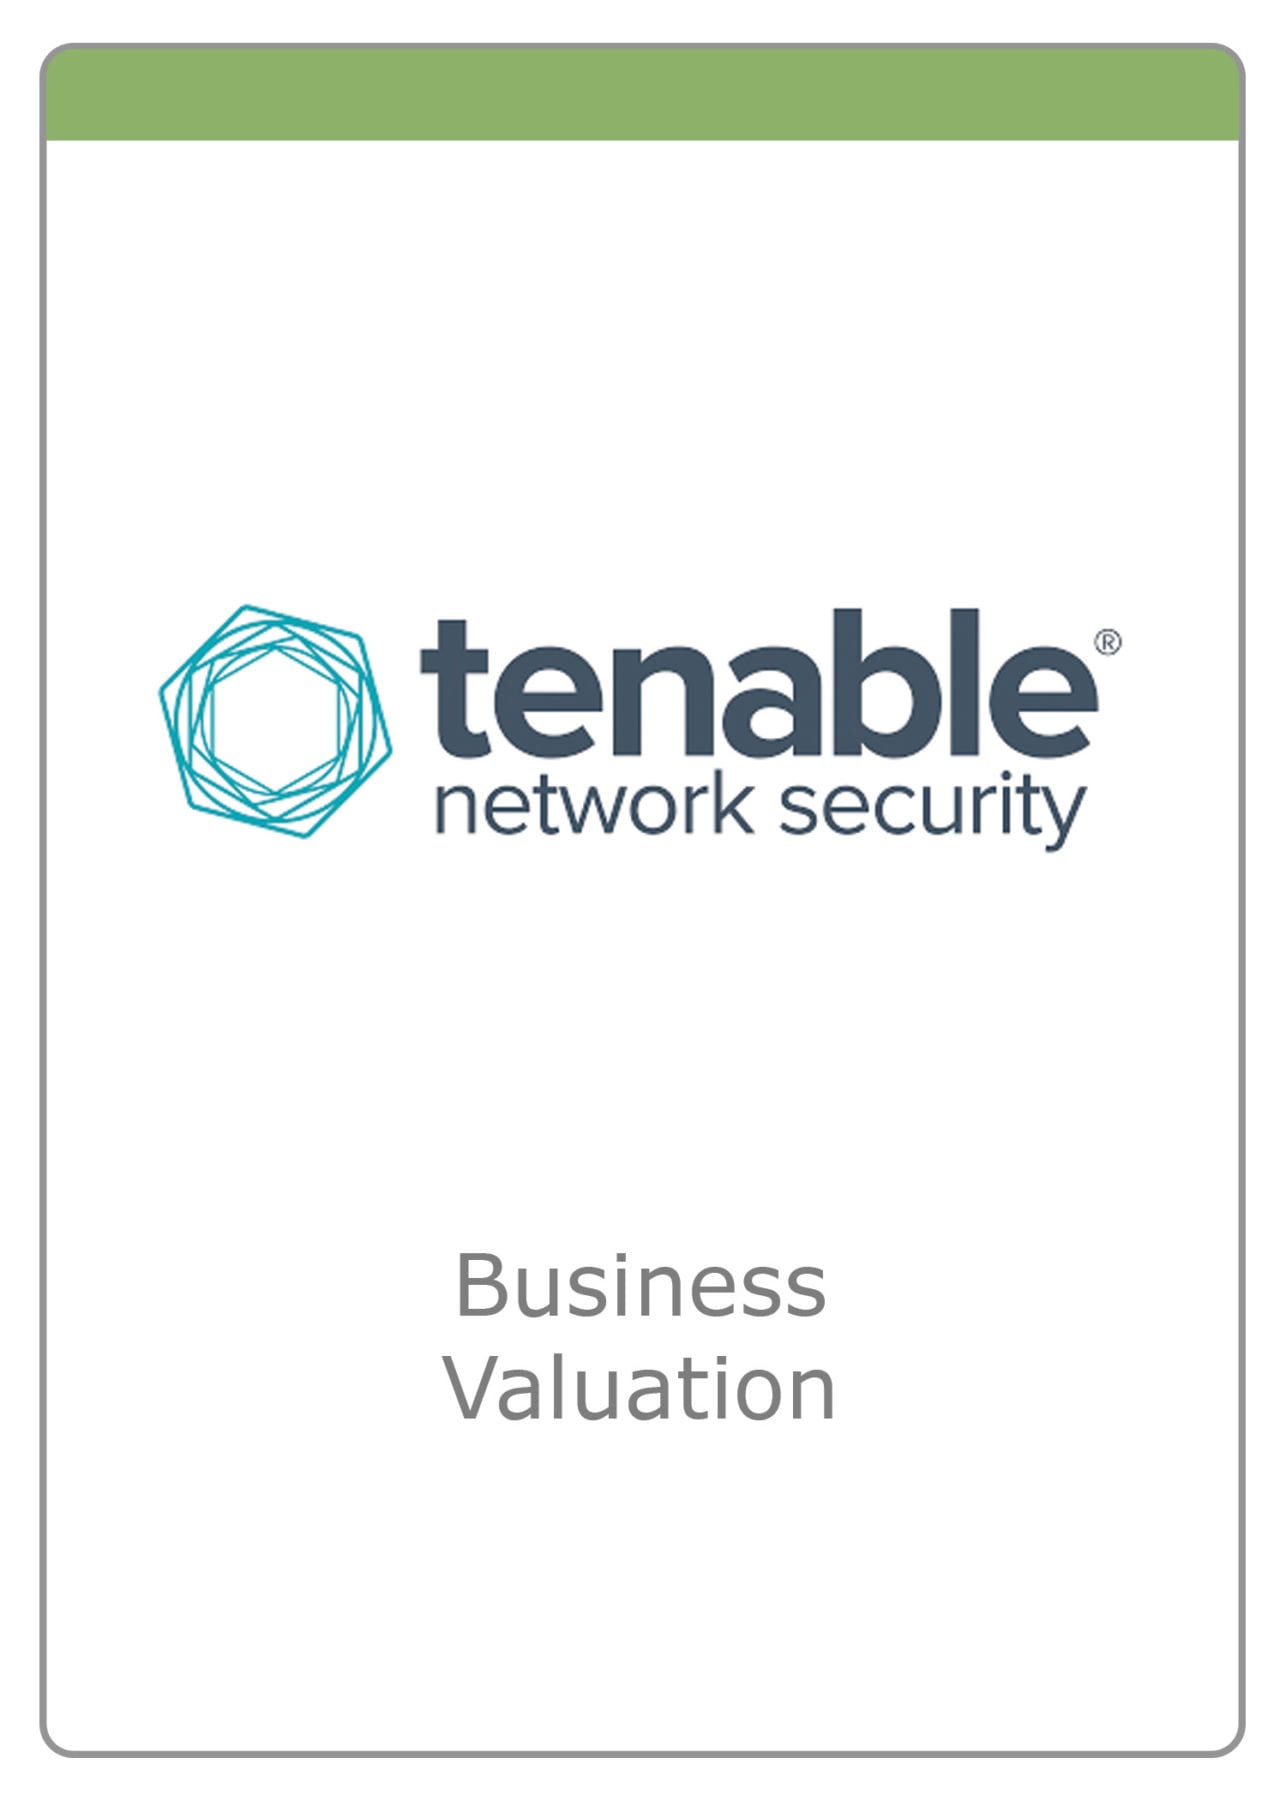 Tenable Business Valuation - The McLean Group